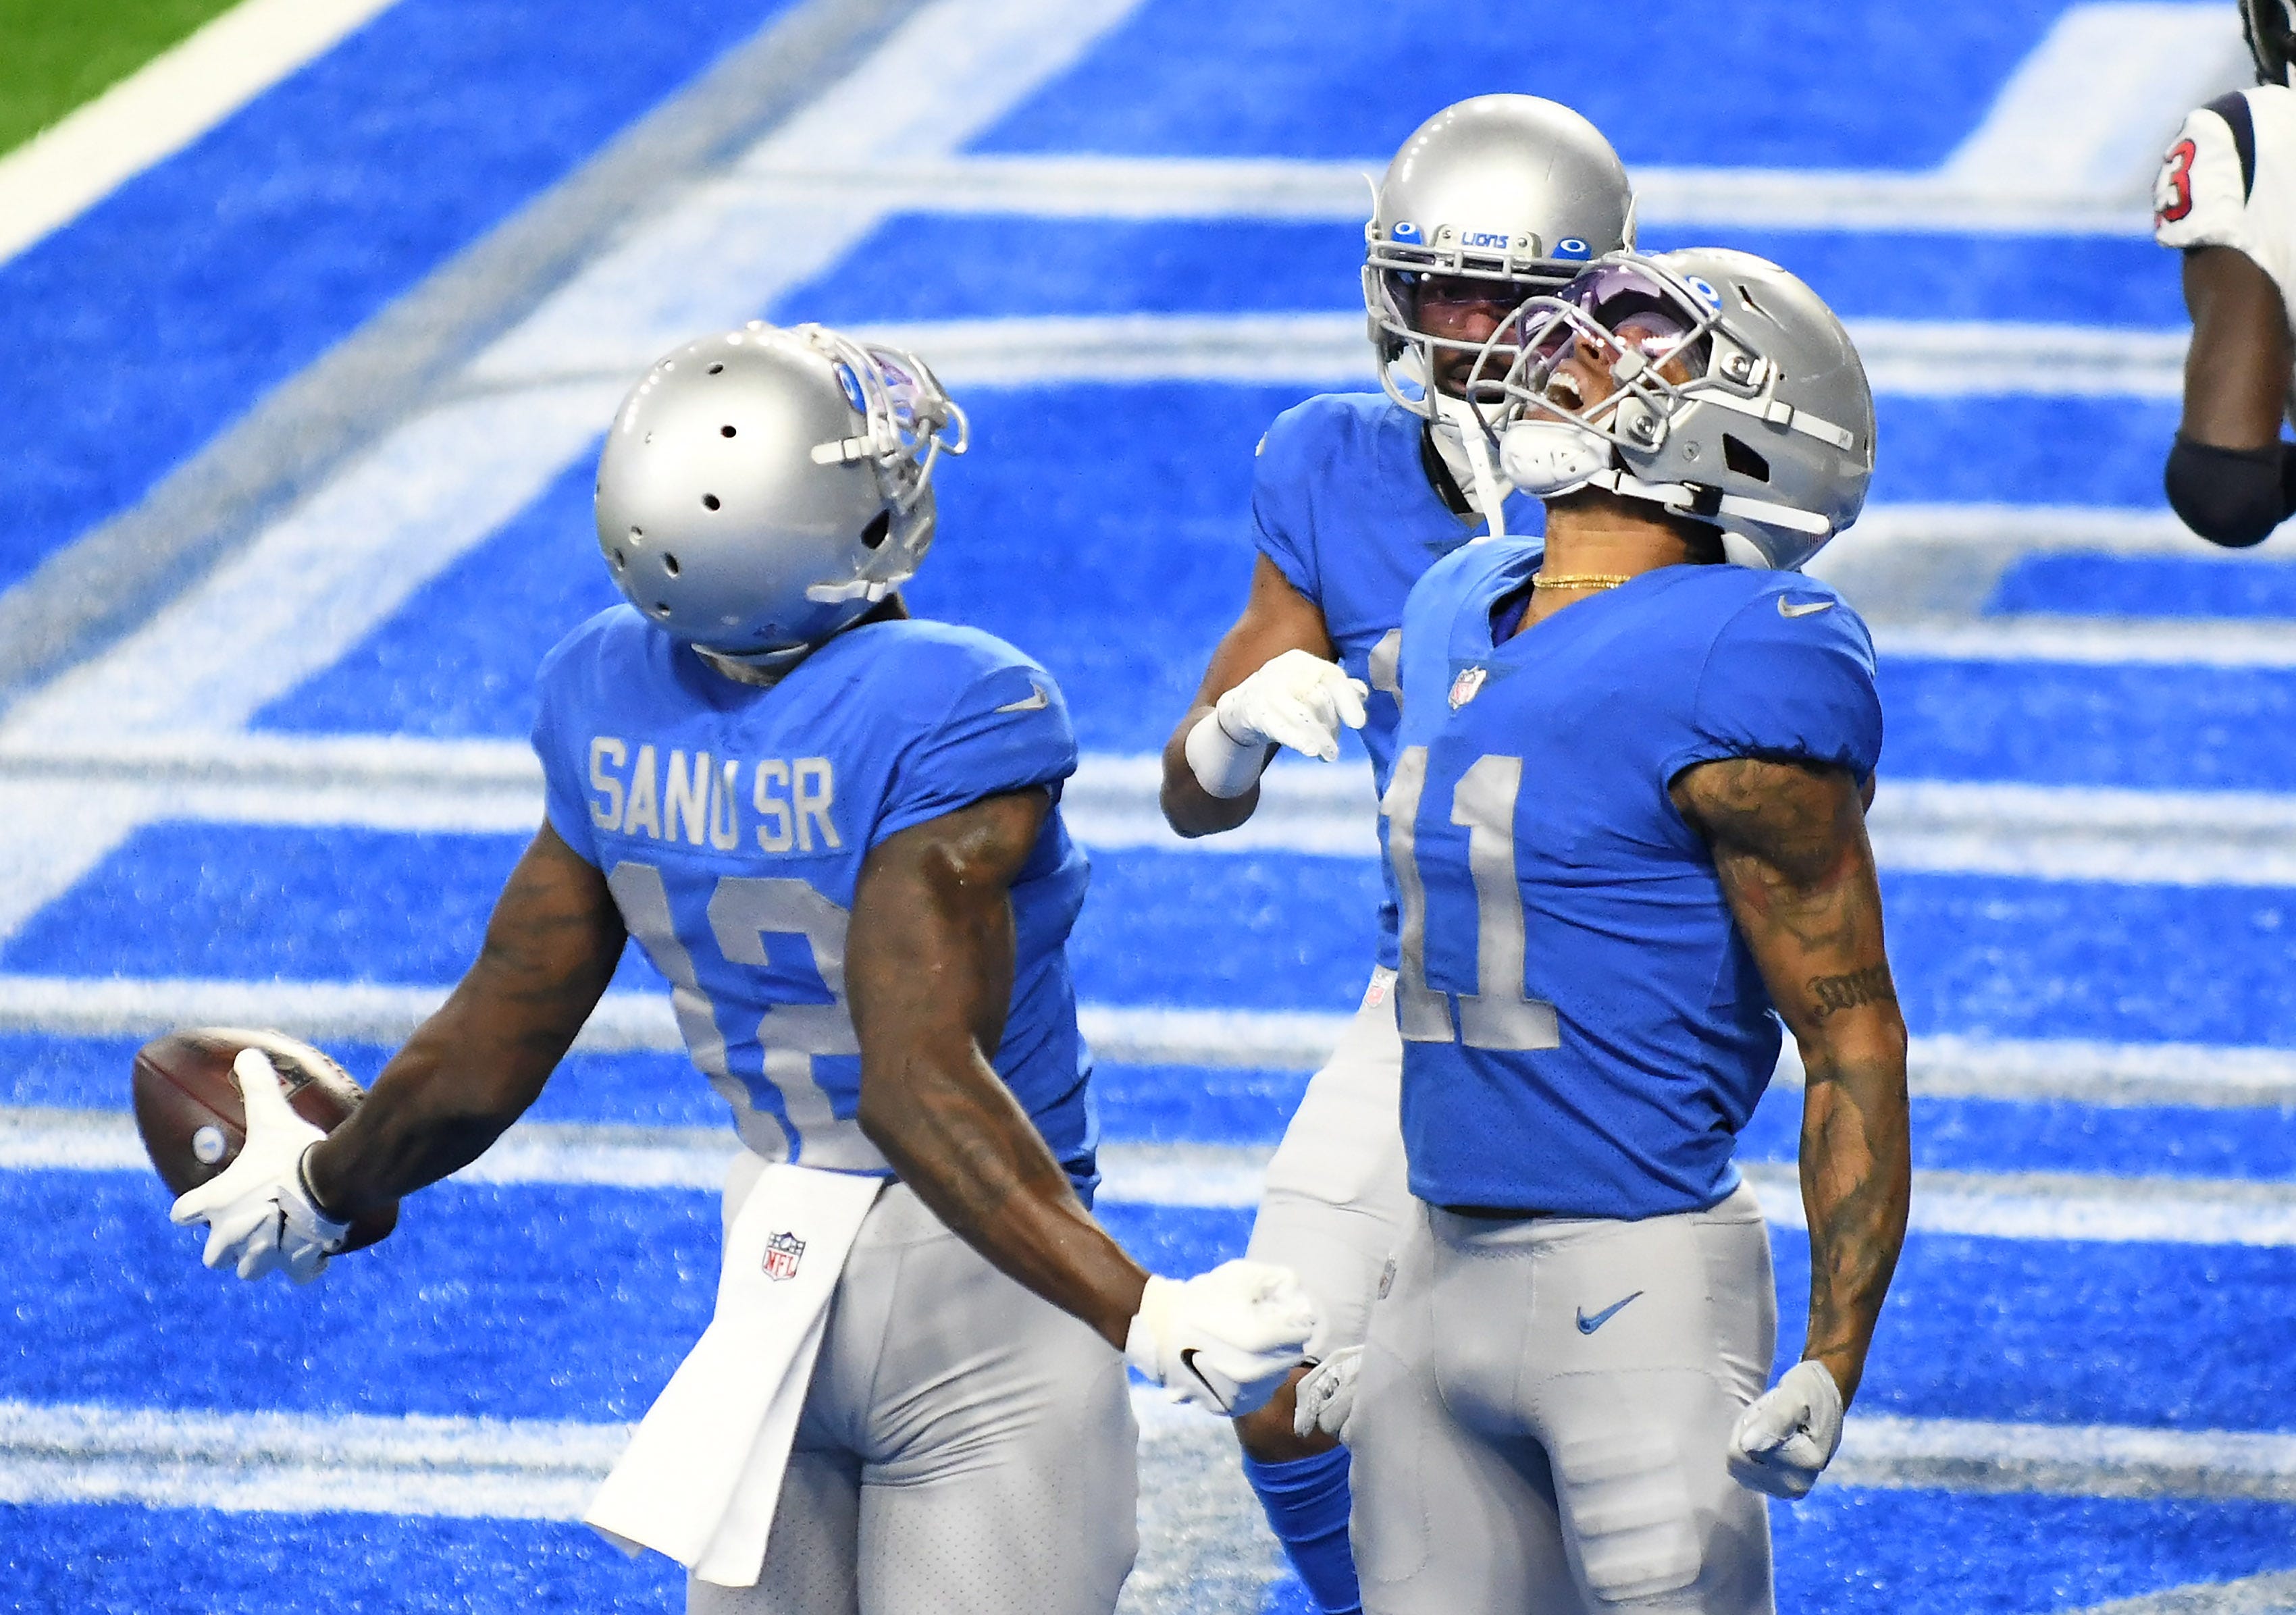 Lions wide receivers Mohamed Sanu Sr. (12) and Marvin Jones Jr. (11) react after Sanu's touchdown in the fourth quarter.